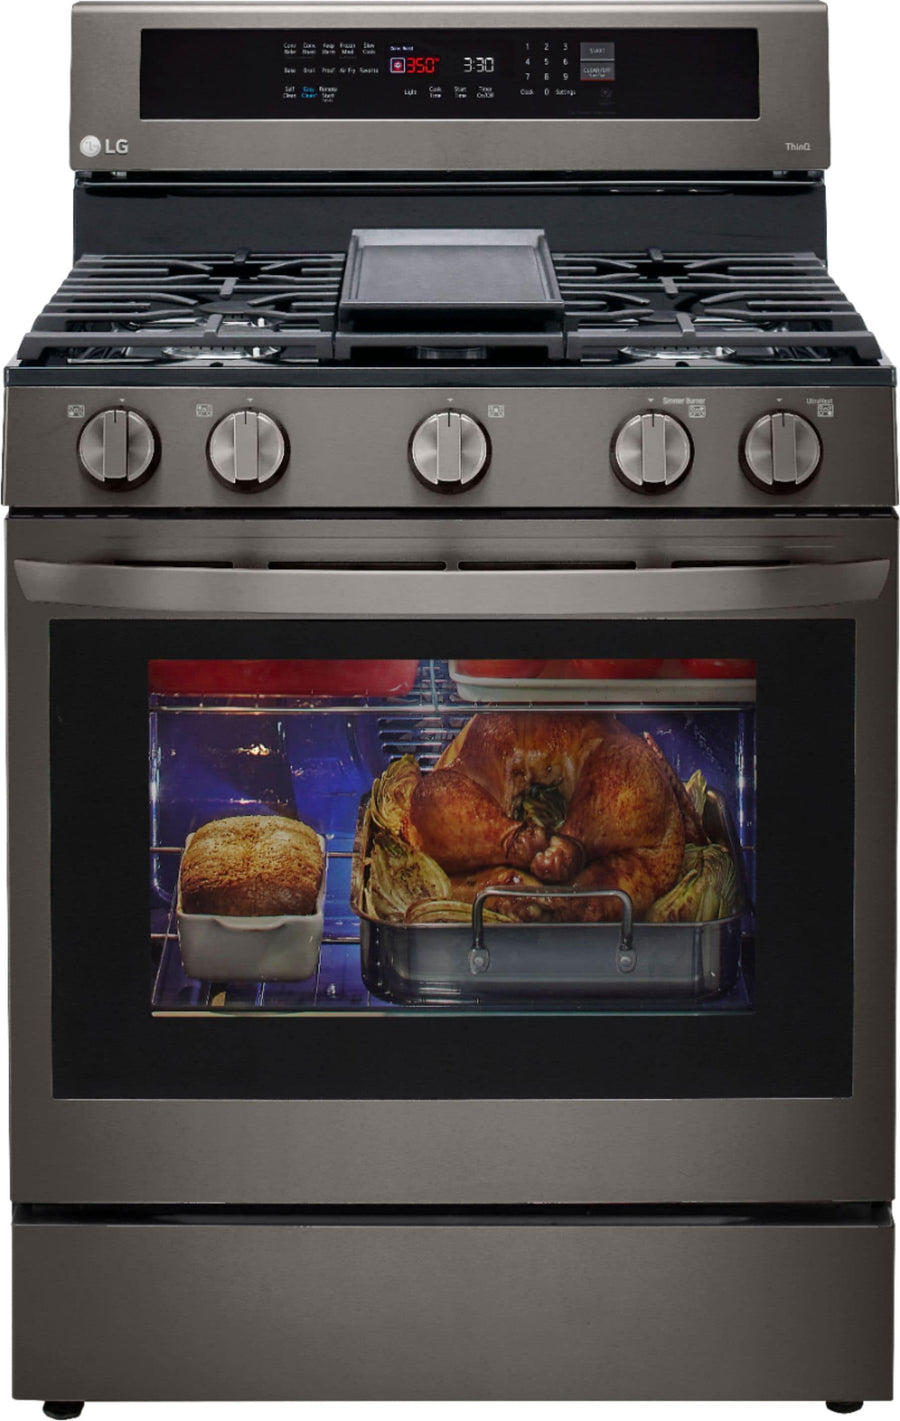 LG - 5.8 Cu. Ft. Freestanding Gas True Convection Range with EasyClean, InstaView and AirFry - Black stainless steel_0